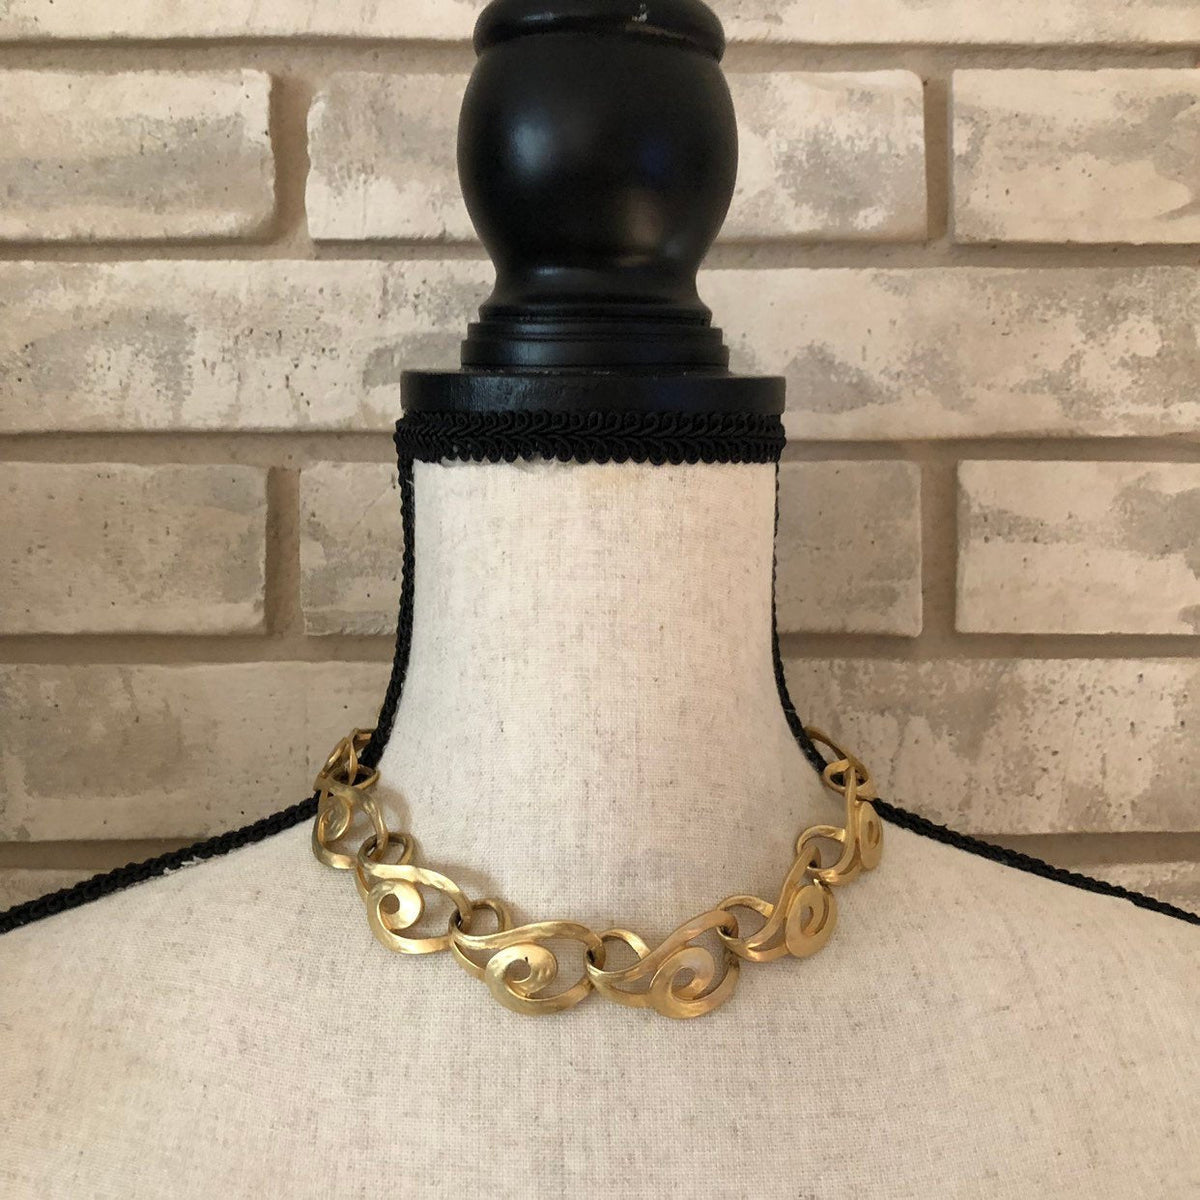 Vintage Erwin Pearl Classic Gold Link Necklace - 24 Wishes Vintage Jewelry